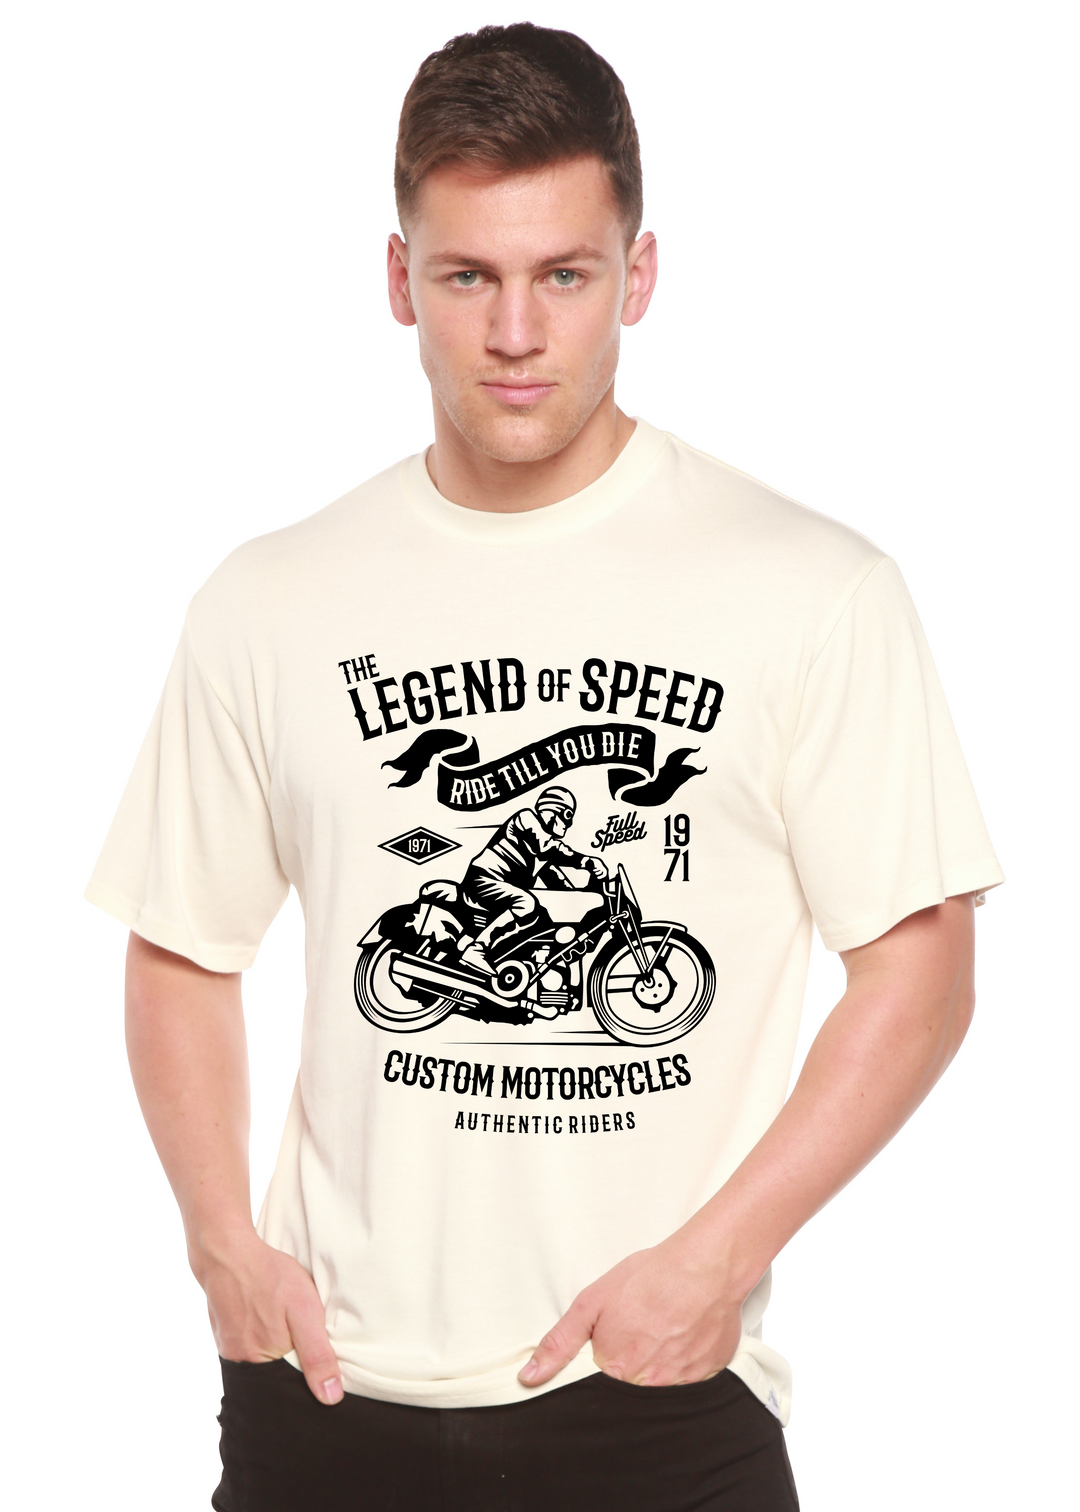 The Legend of Speed men's bamboo tshirt white